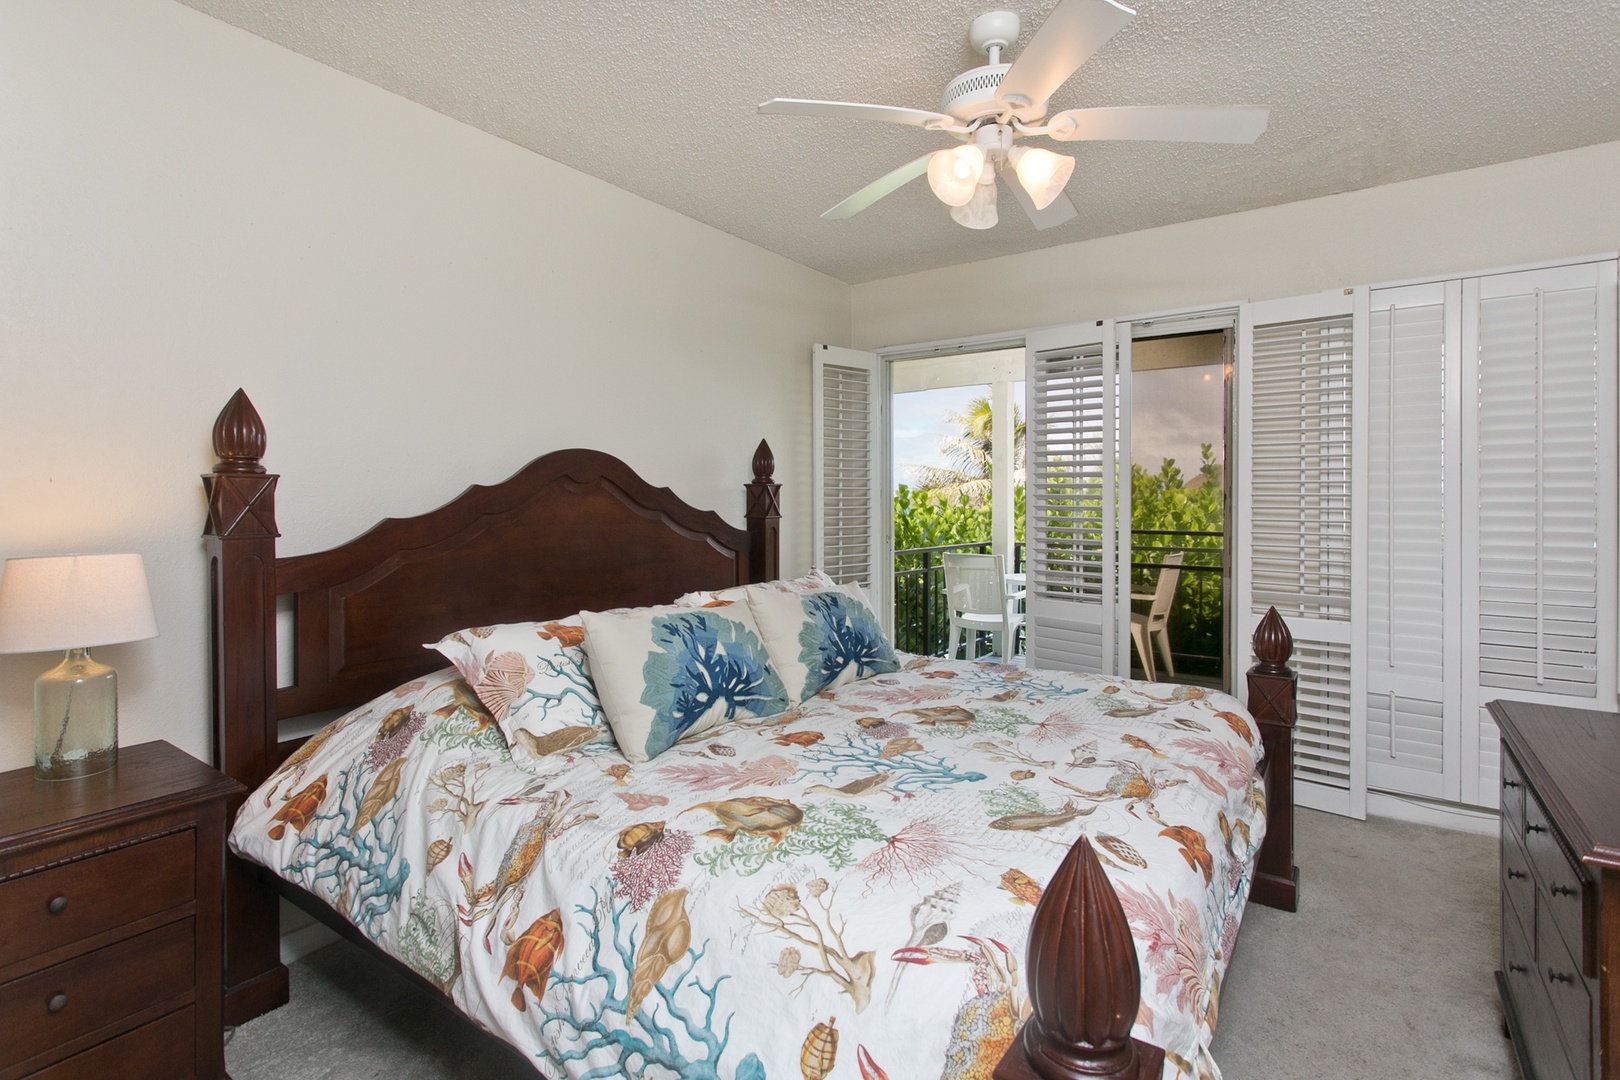 Kailua Vacation Rentals, Hale Kolea* - Guest bedroom with a plush king bed and private lanai.